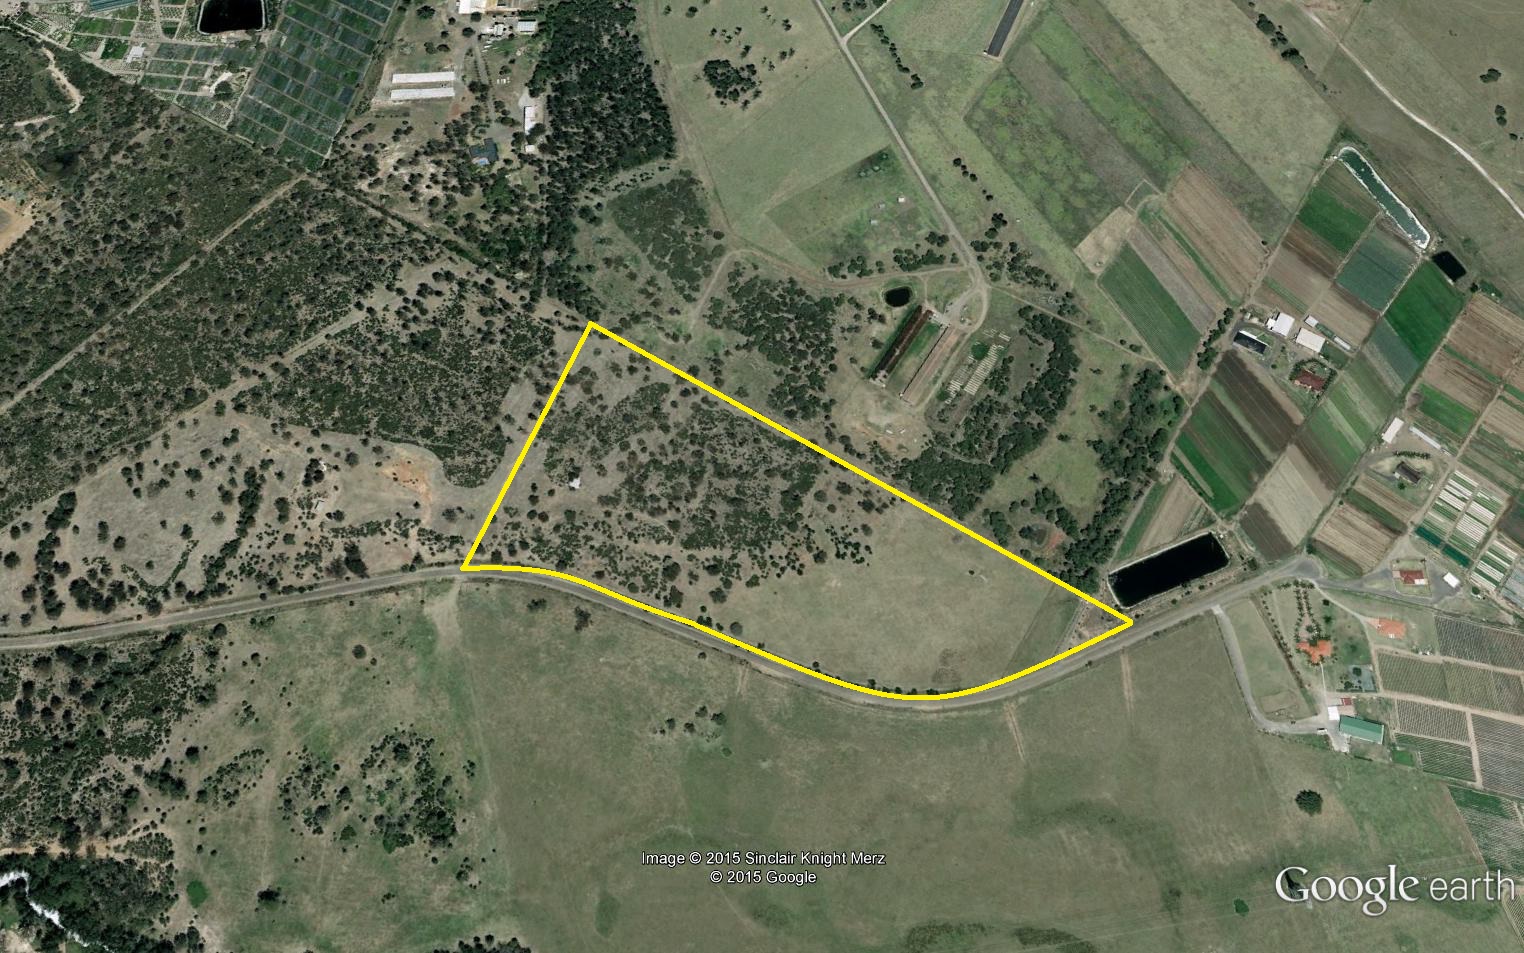 26 ACRES IN FUTURE GROWTH AREA – KEMPS CREEK